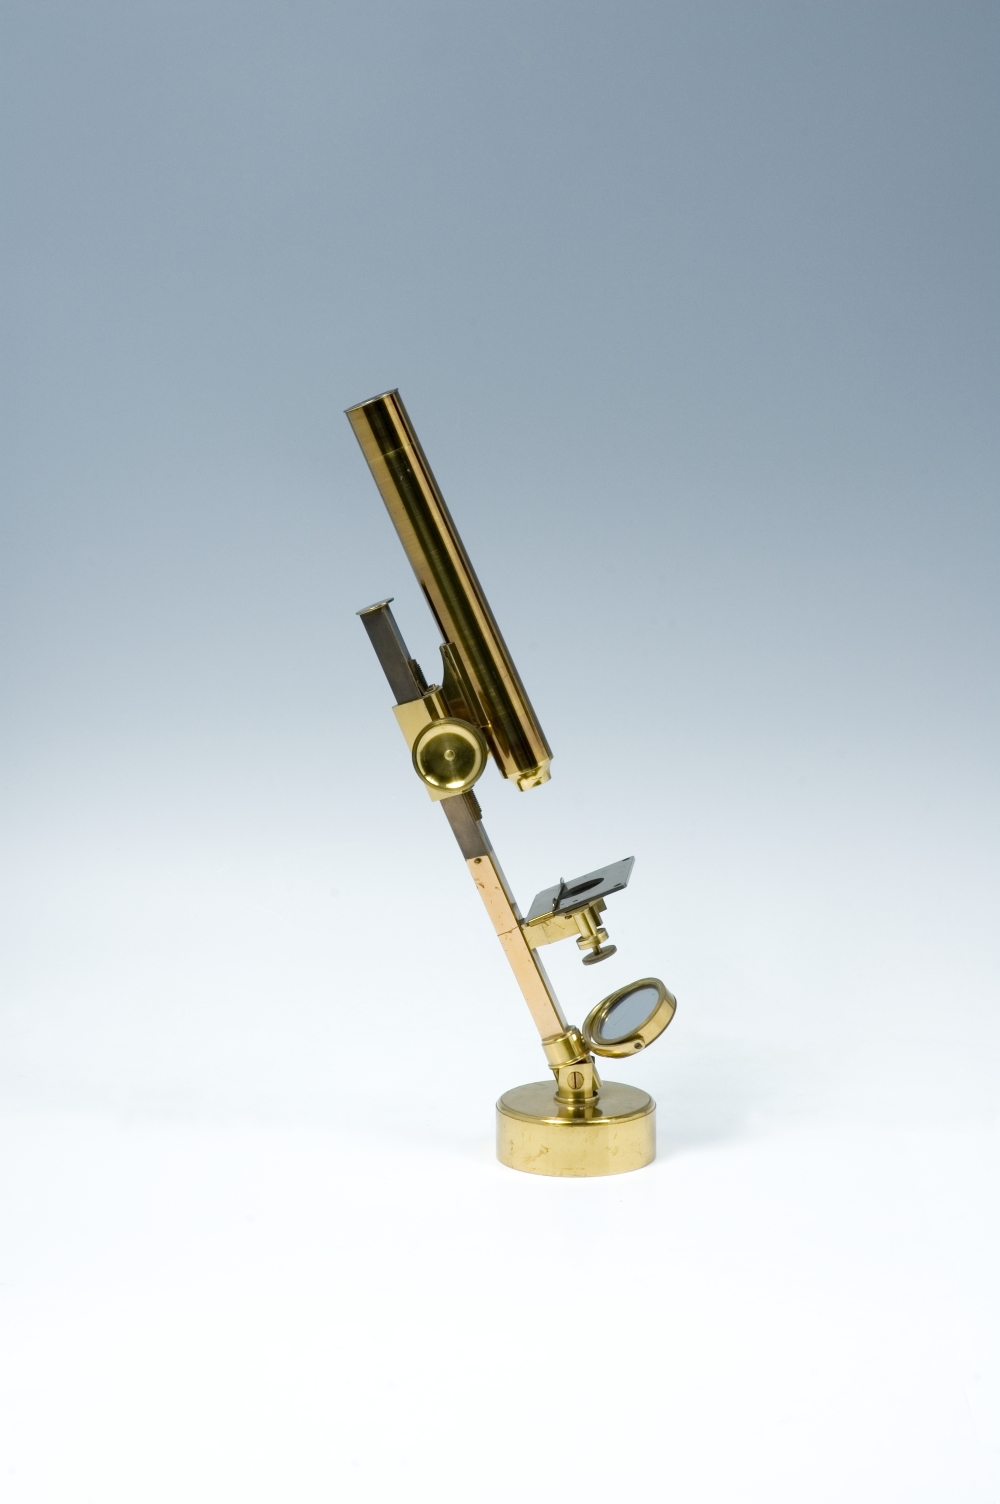 preview image for Compound Microscope, attributed to Hugh Powell, London, c. 1840